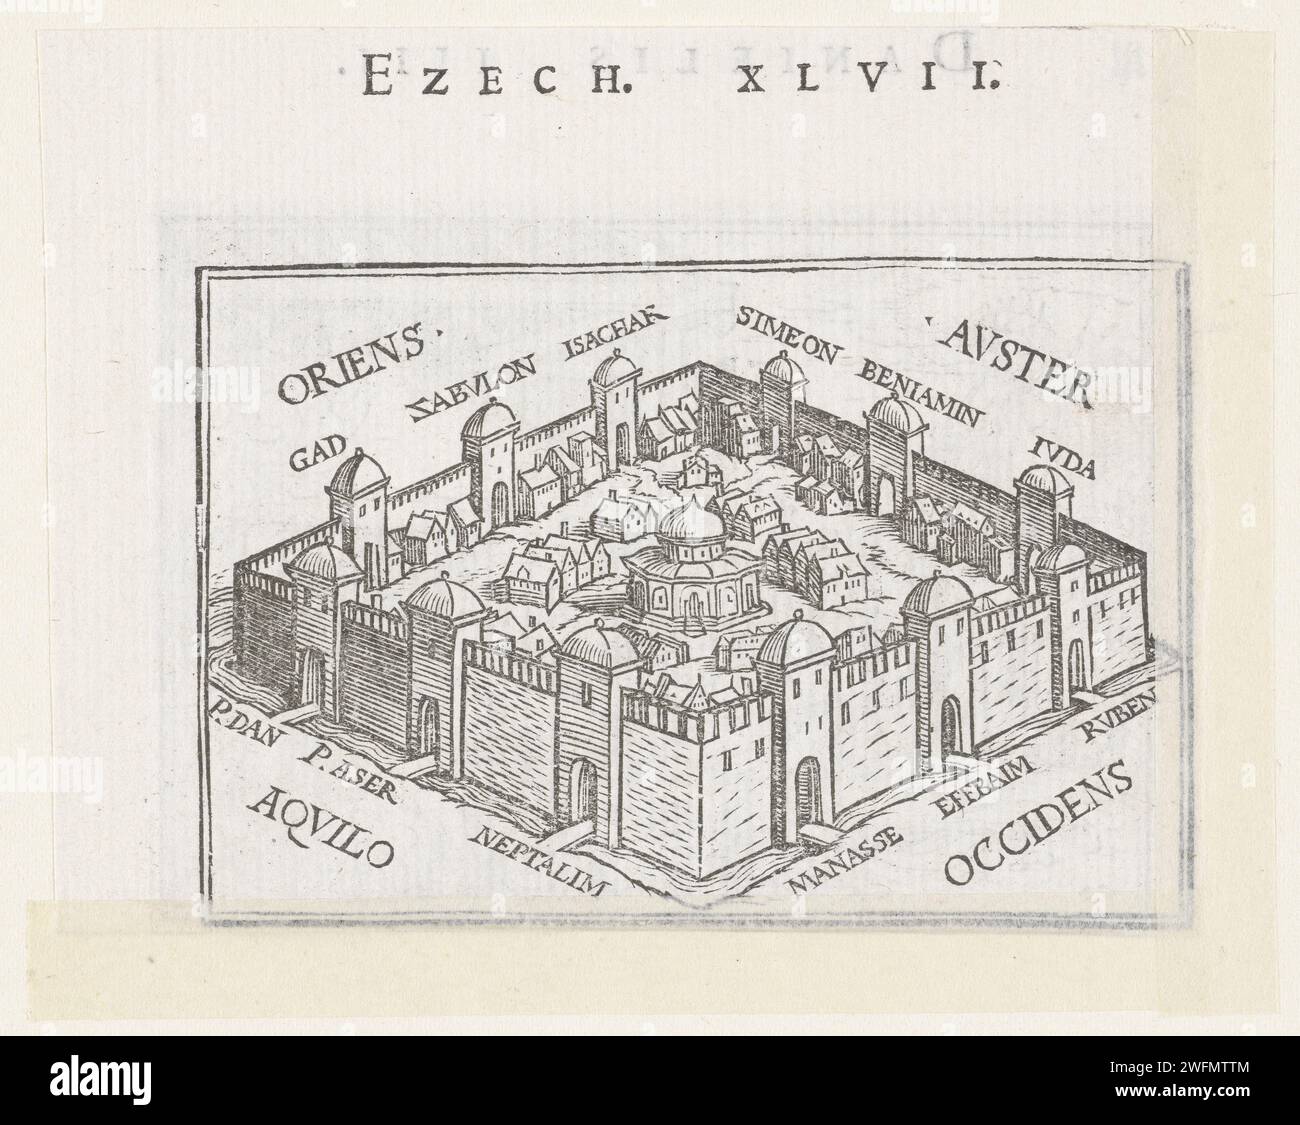 Heavenly city in Visioen van Ezekiel, Hans Holbein (II), 1538 print The heavenly city with the new temple as Ezekiel sees it in a vision. The wind directions are indicated and at the gates are names of the tribes of Israel. In the margin above the image is the text Ezek. XLVII.  paper  Ezekiel's vision of the new temple (Ezekiel 40 - 47:12) Stock Photo